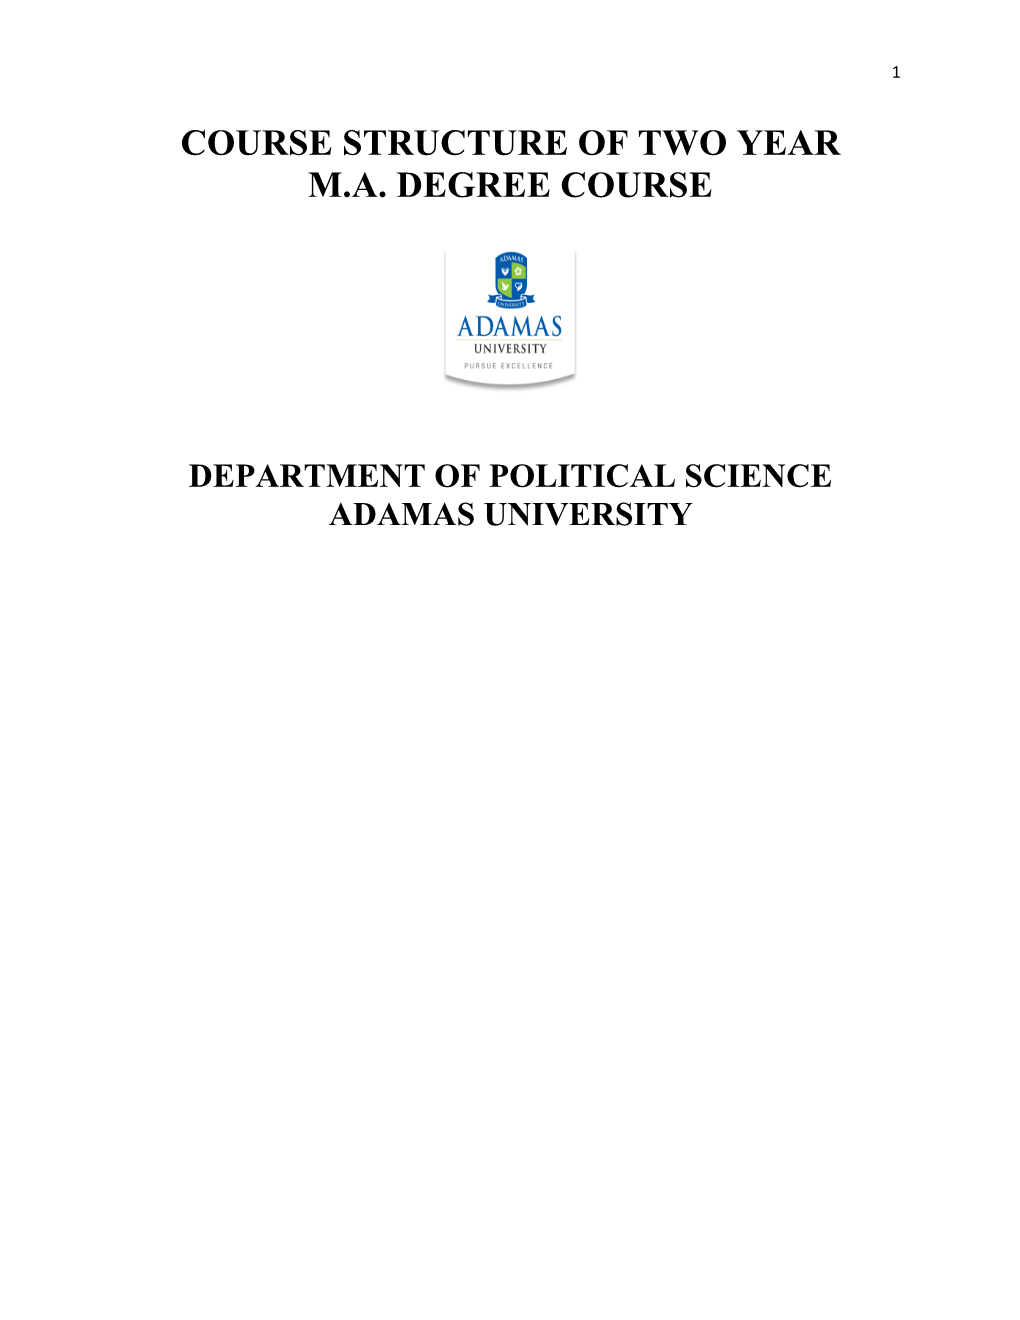 Course Structure of Two Year M.A. Degree Course